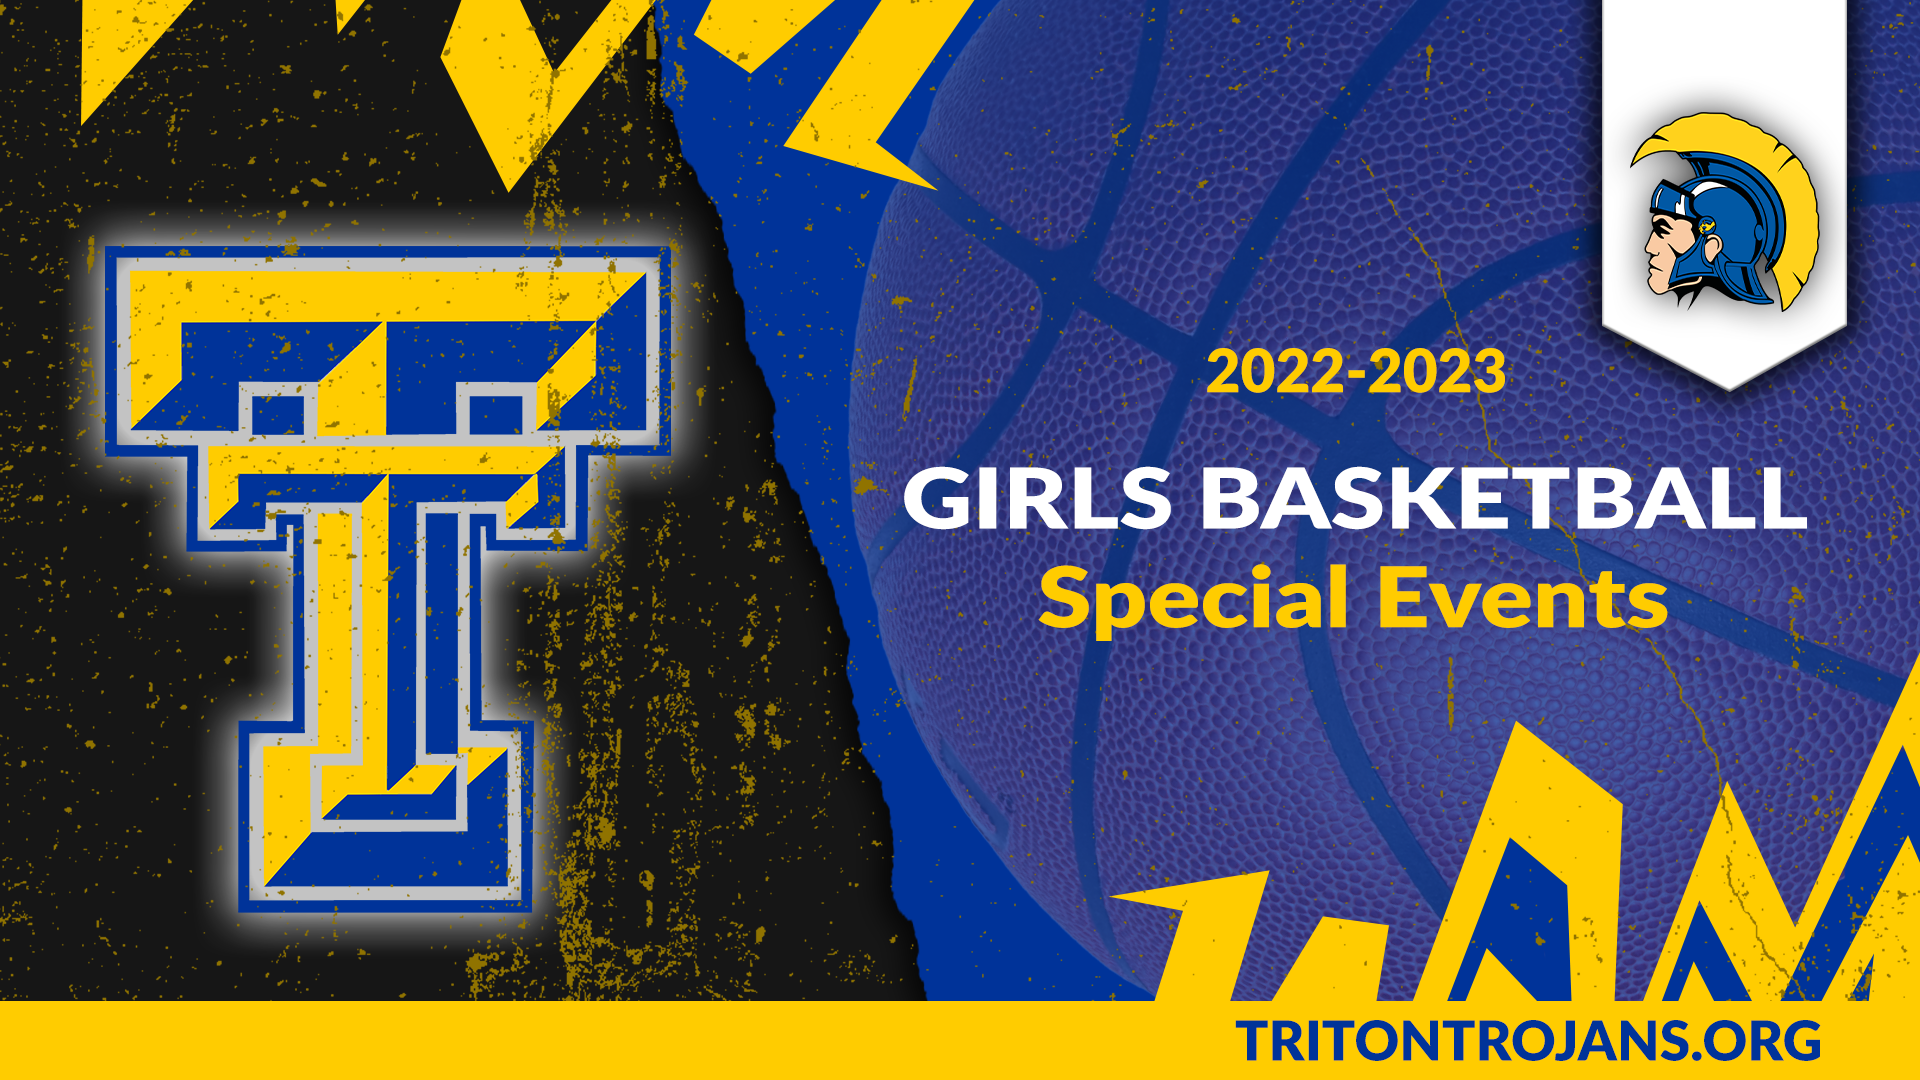 Girls Basketball Special Events 2022-23